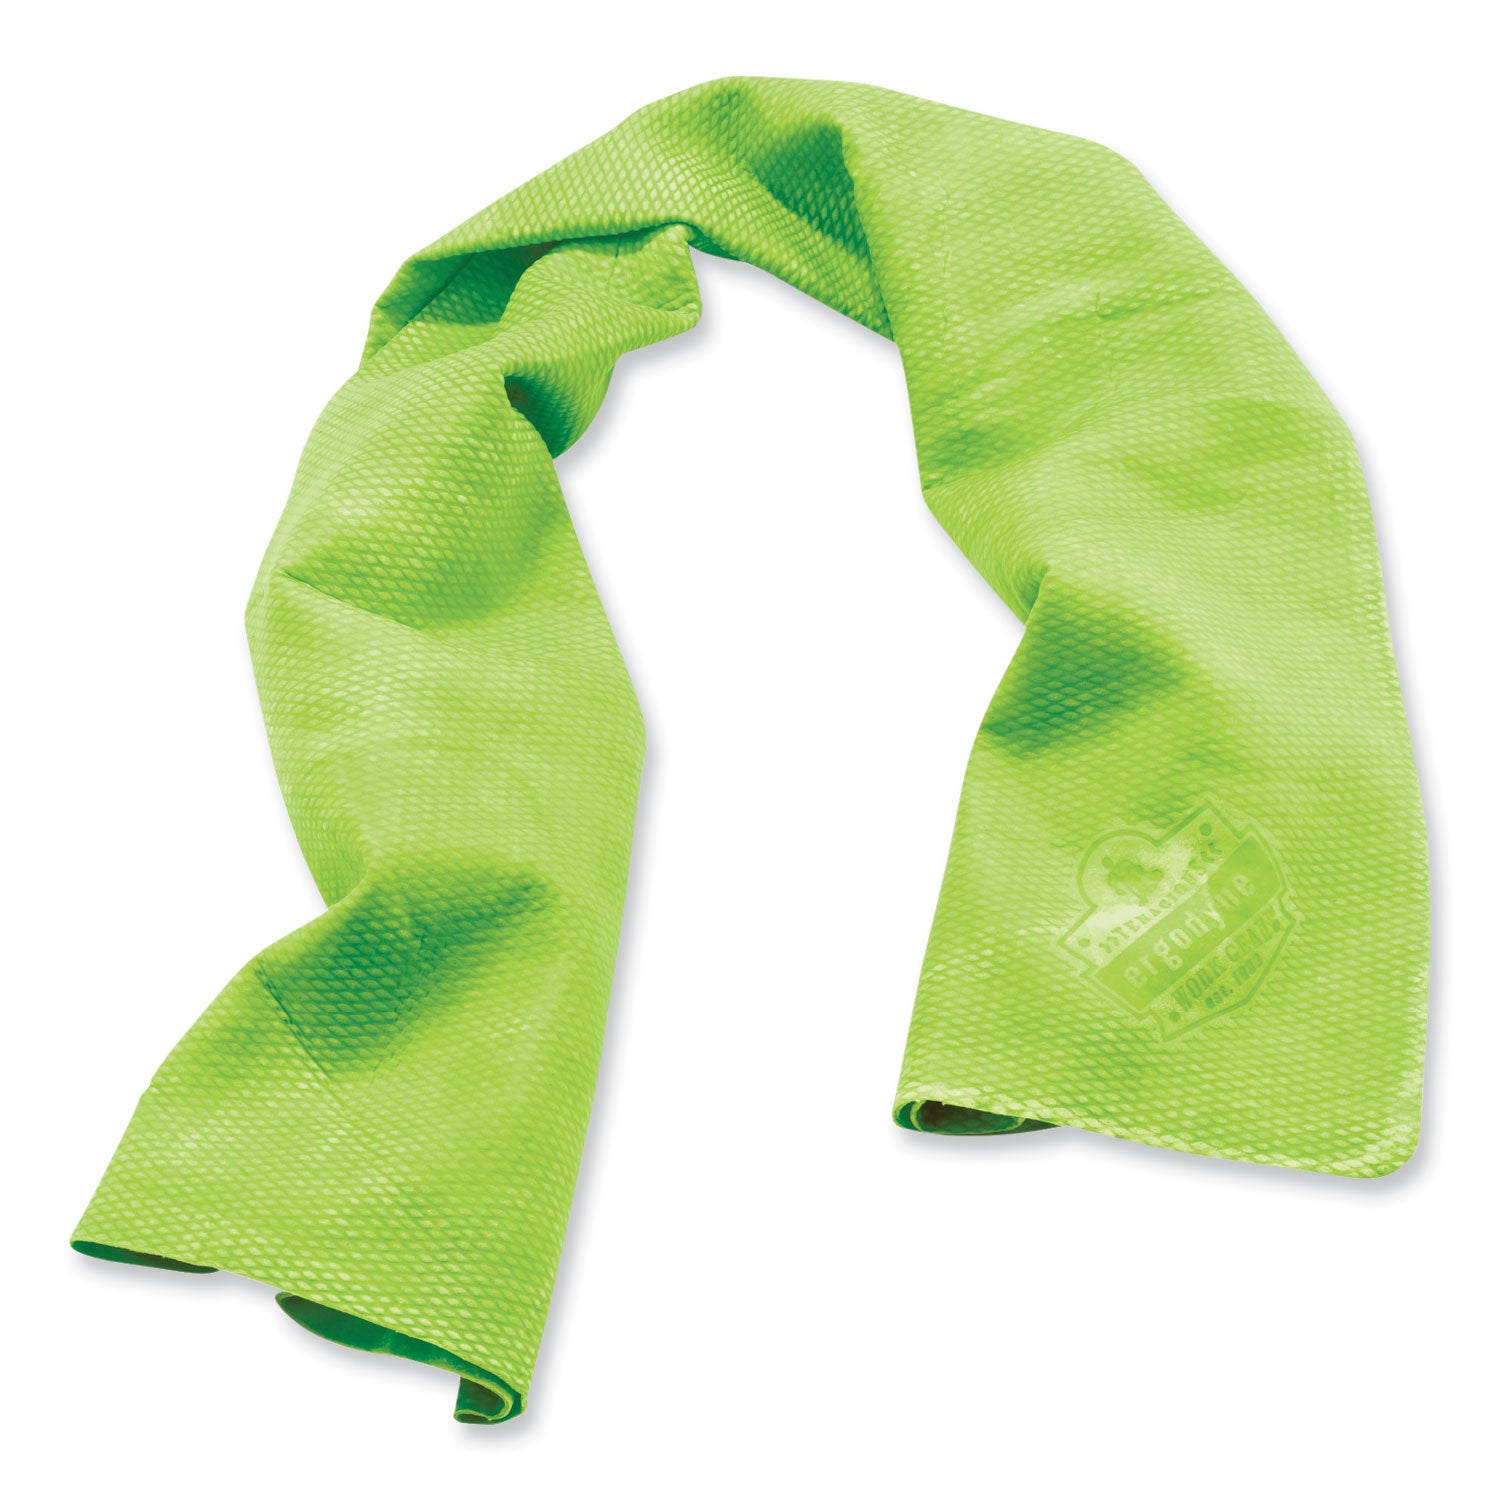 chill-its-6602-evaporative-pva-cooling-towel-295-x-13-one-size-fits-most-pva-hi-vis-lime-ships-in-1-3-business-days_ego12439 - 1